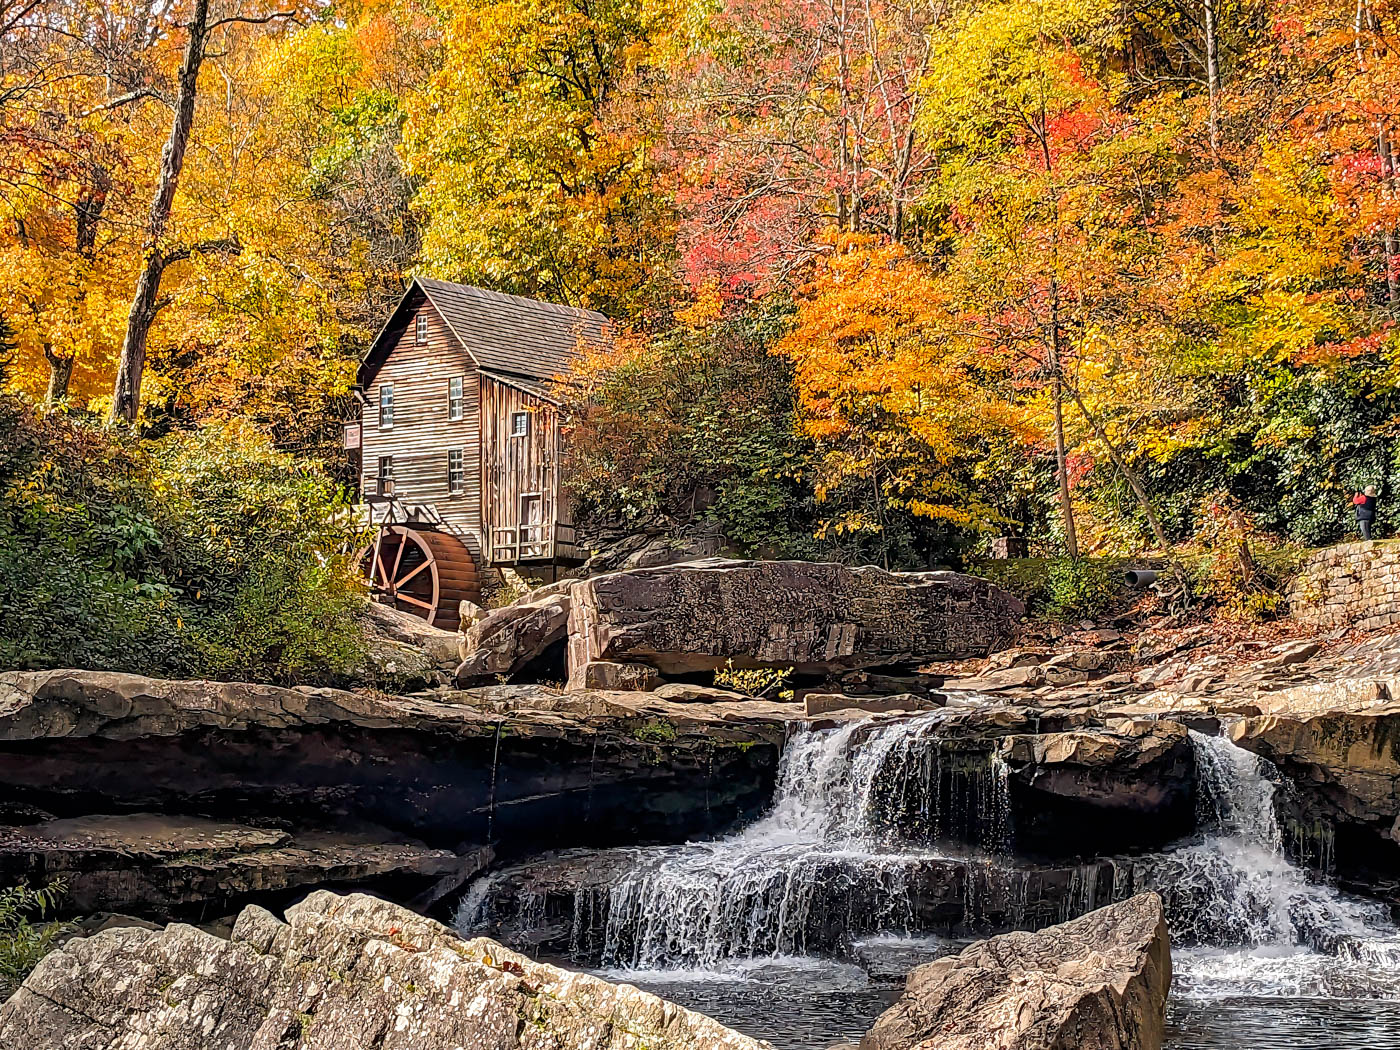 Gristmill in the Fall by John Larson